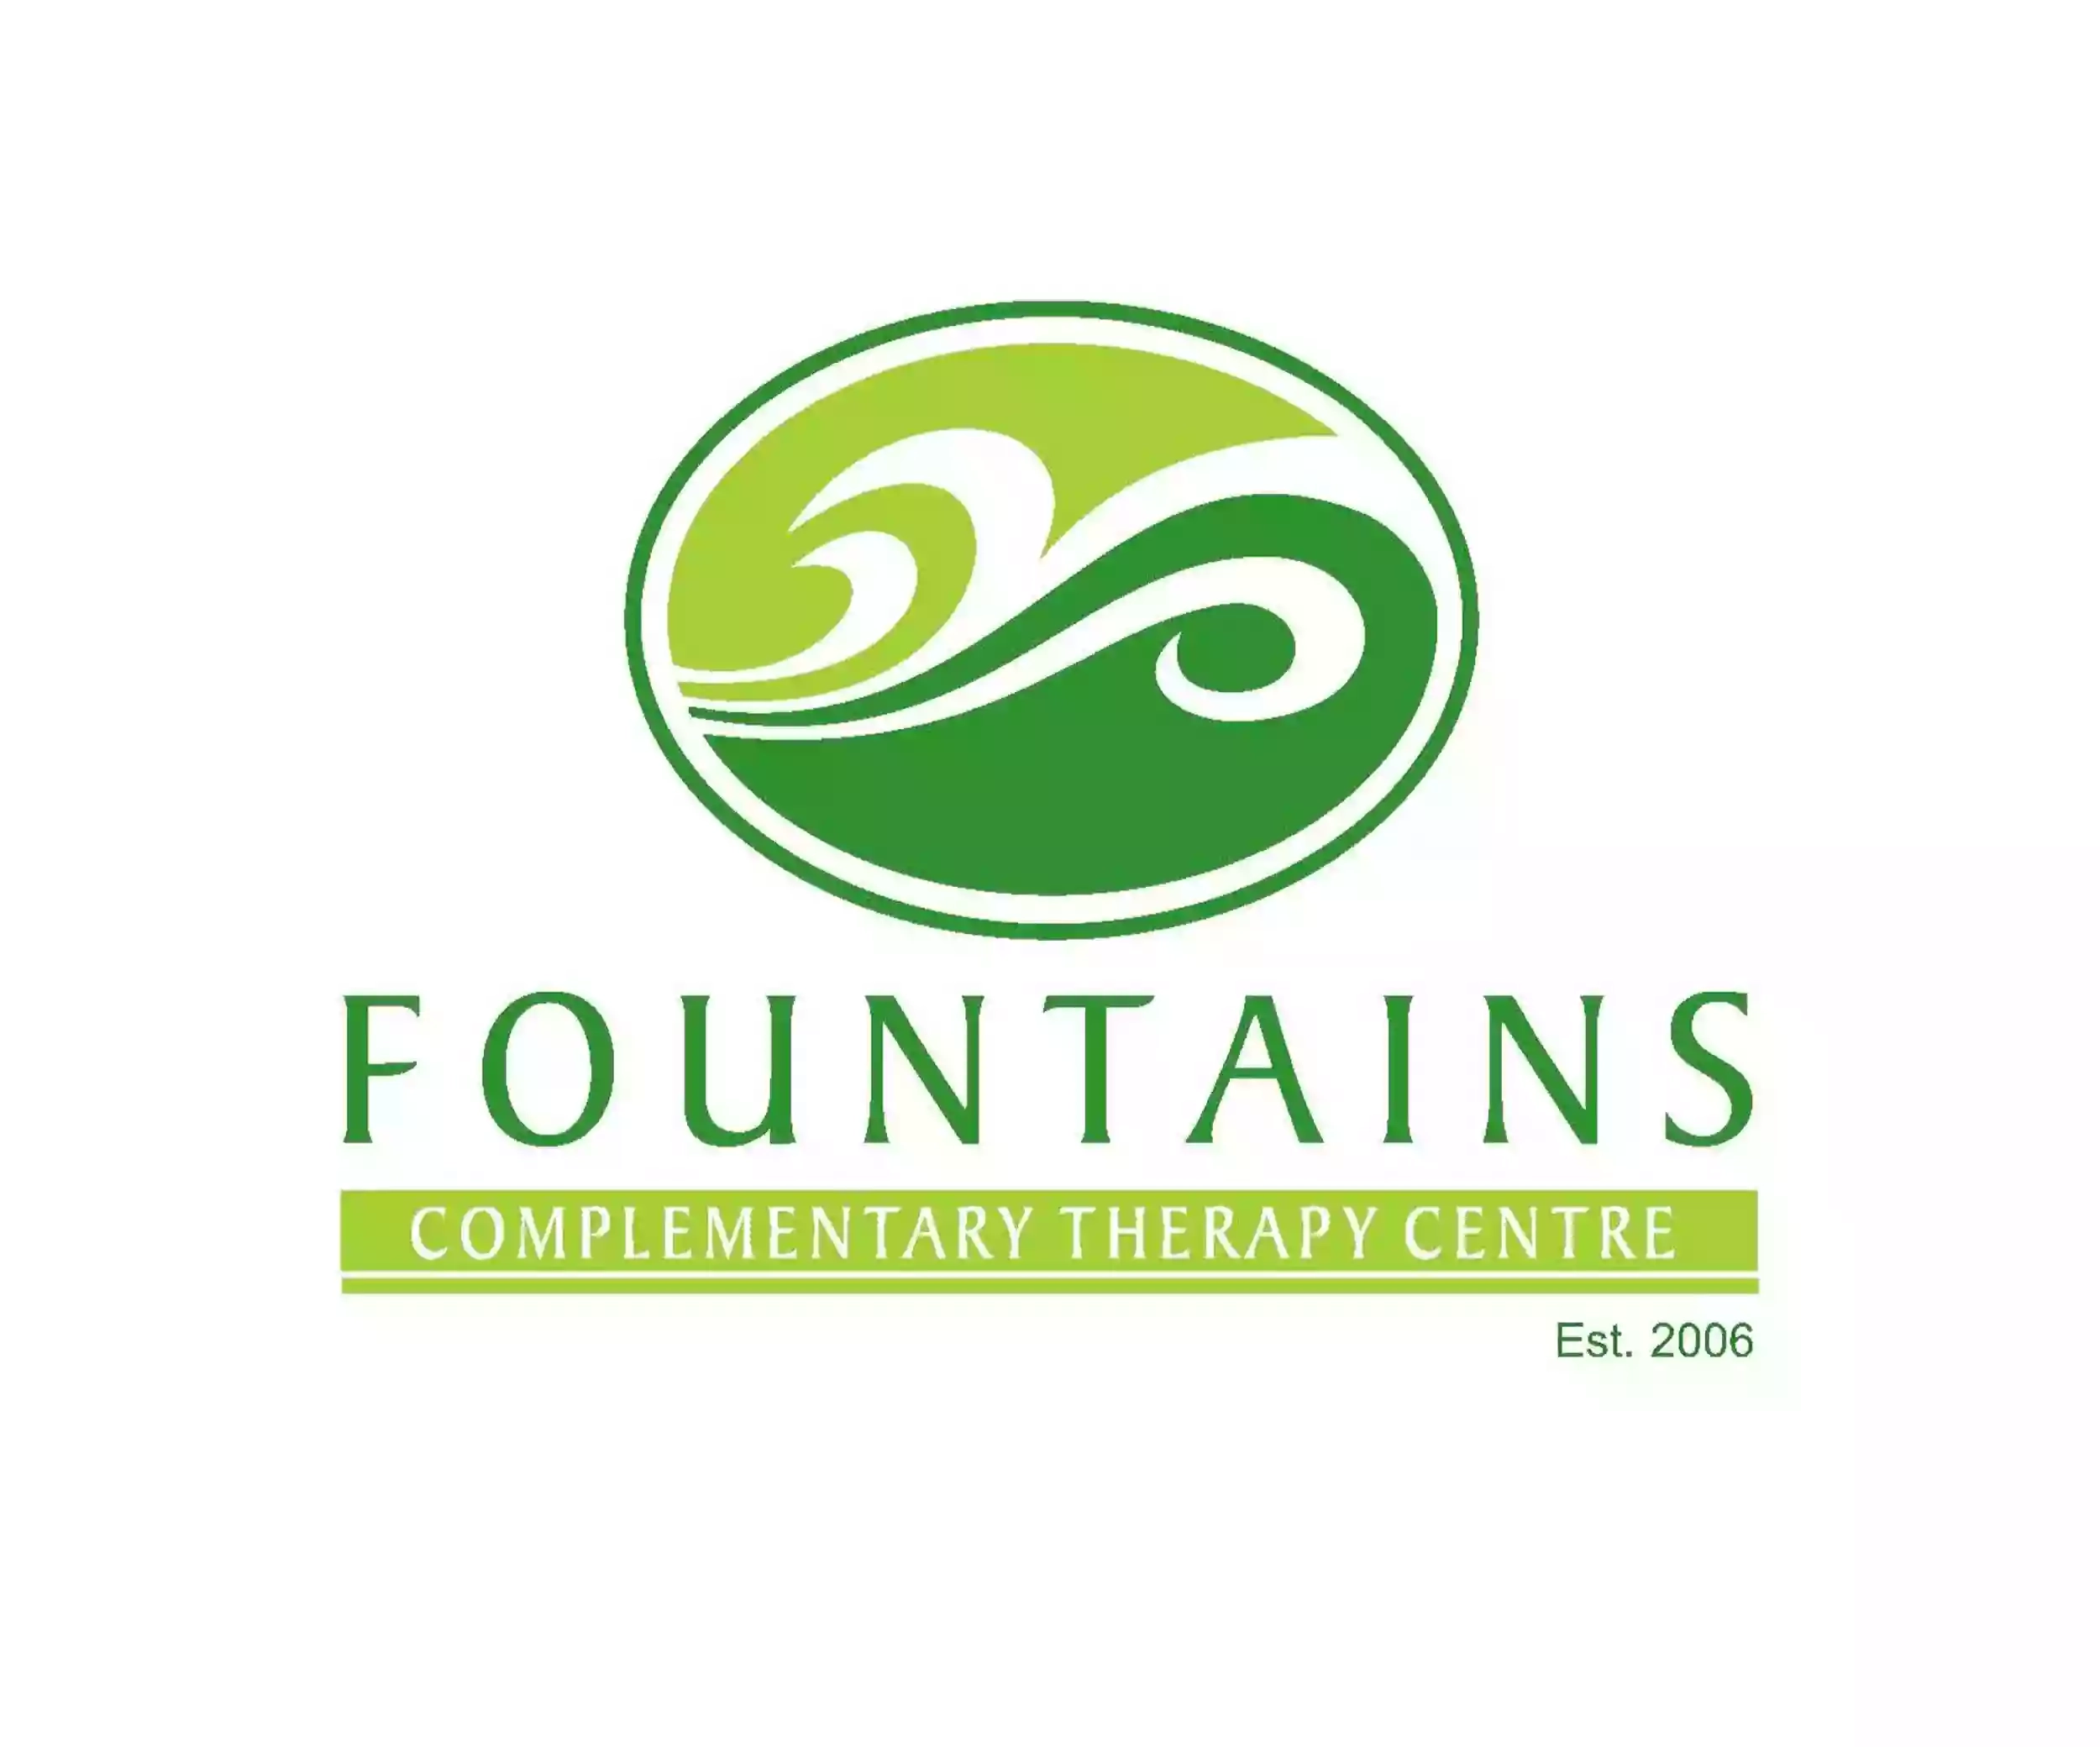 Fountains Complementary Therapy Centre